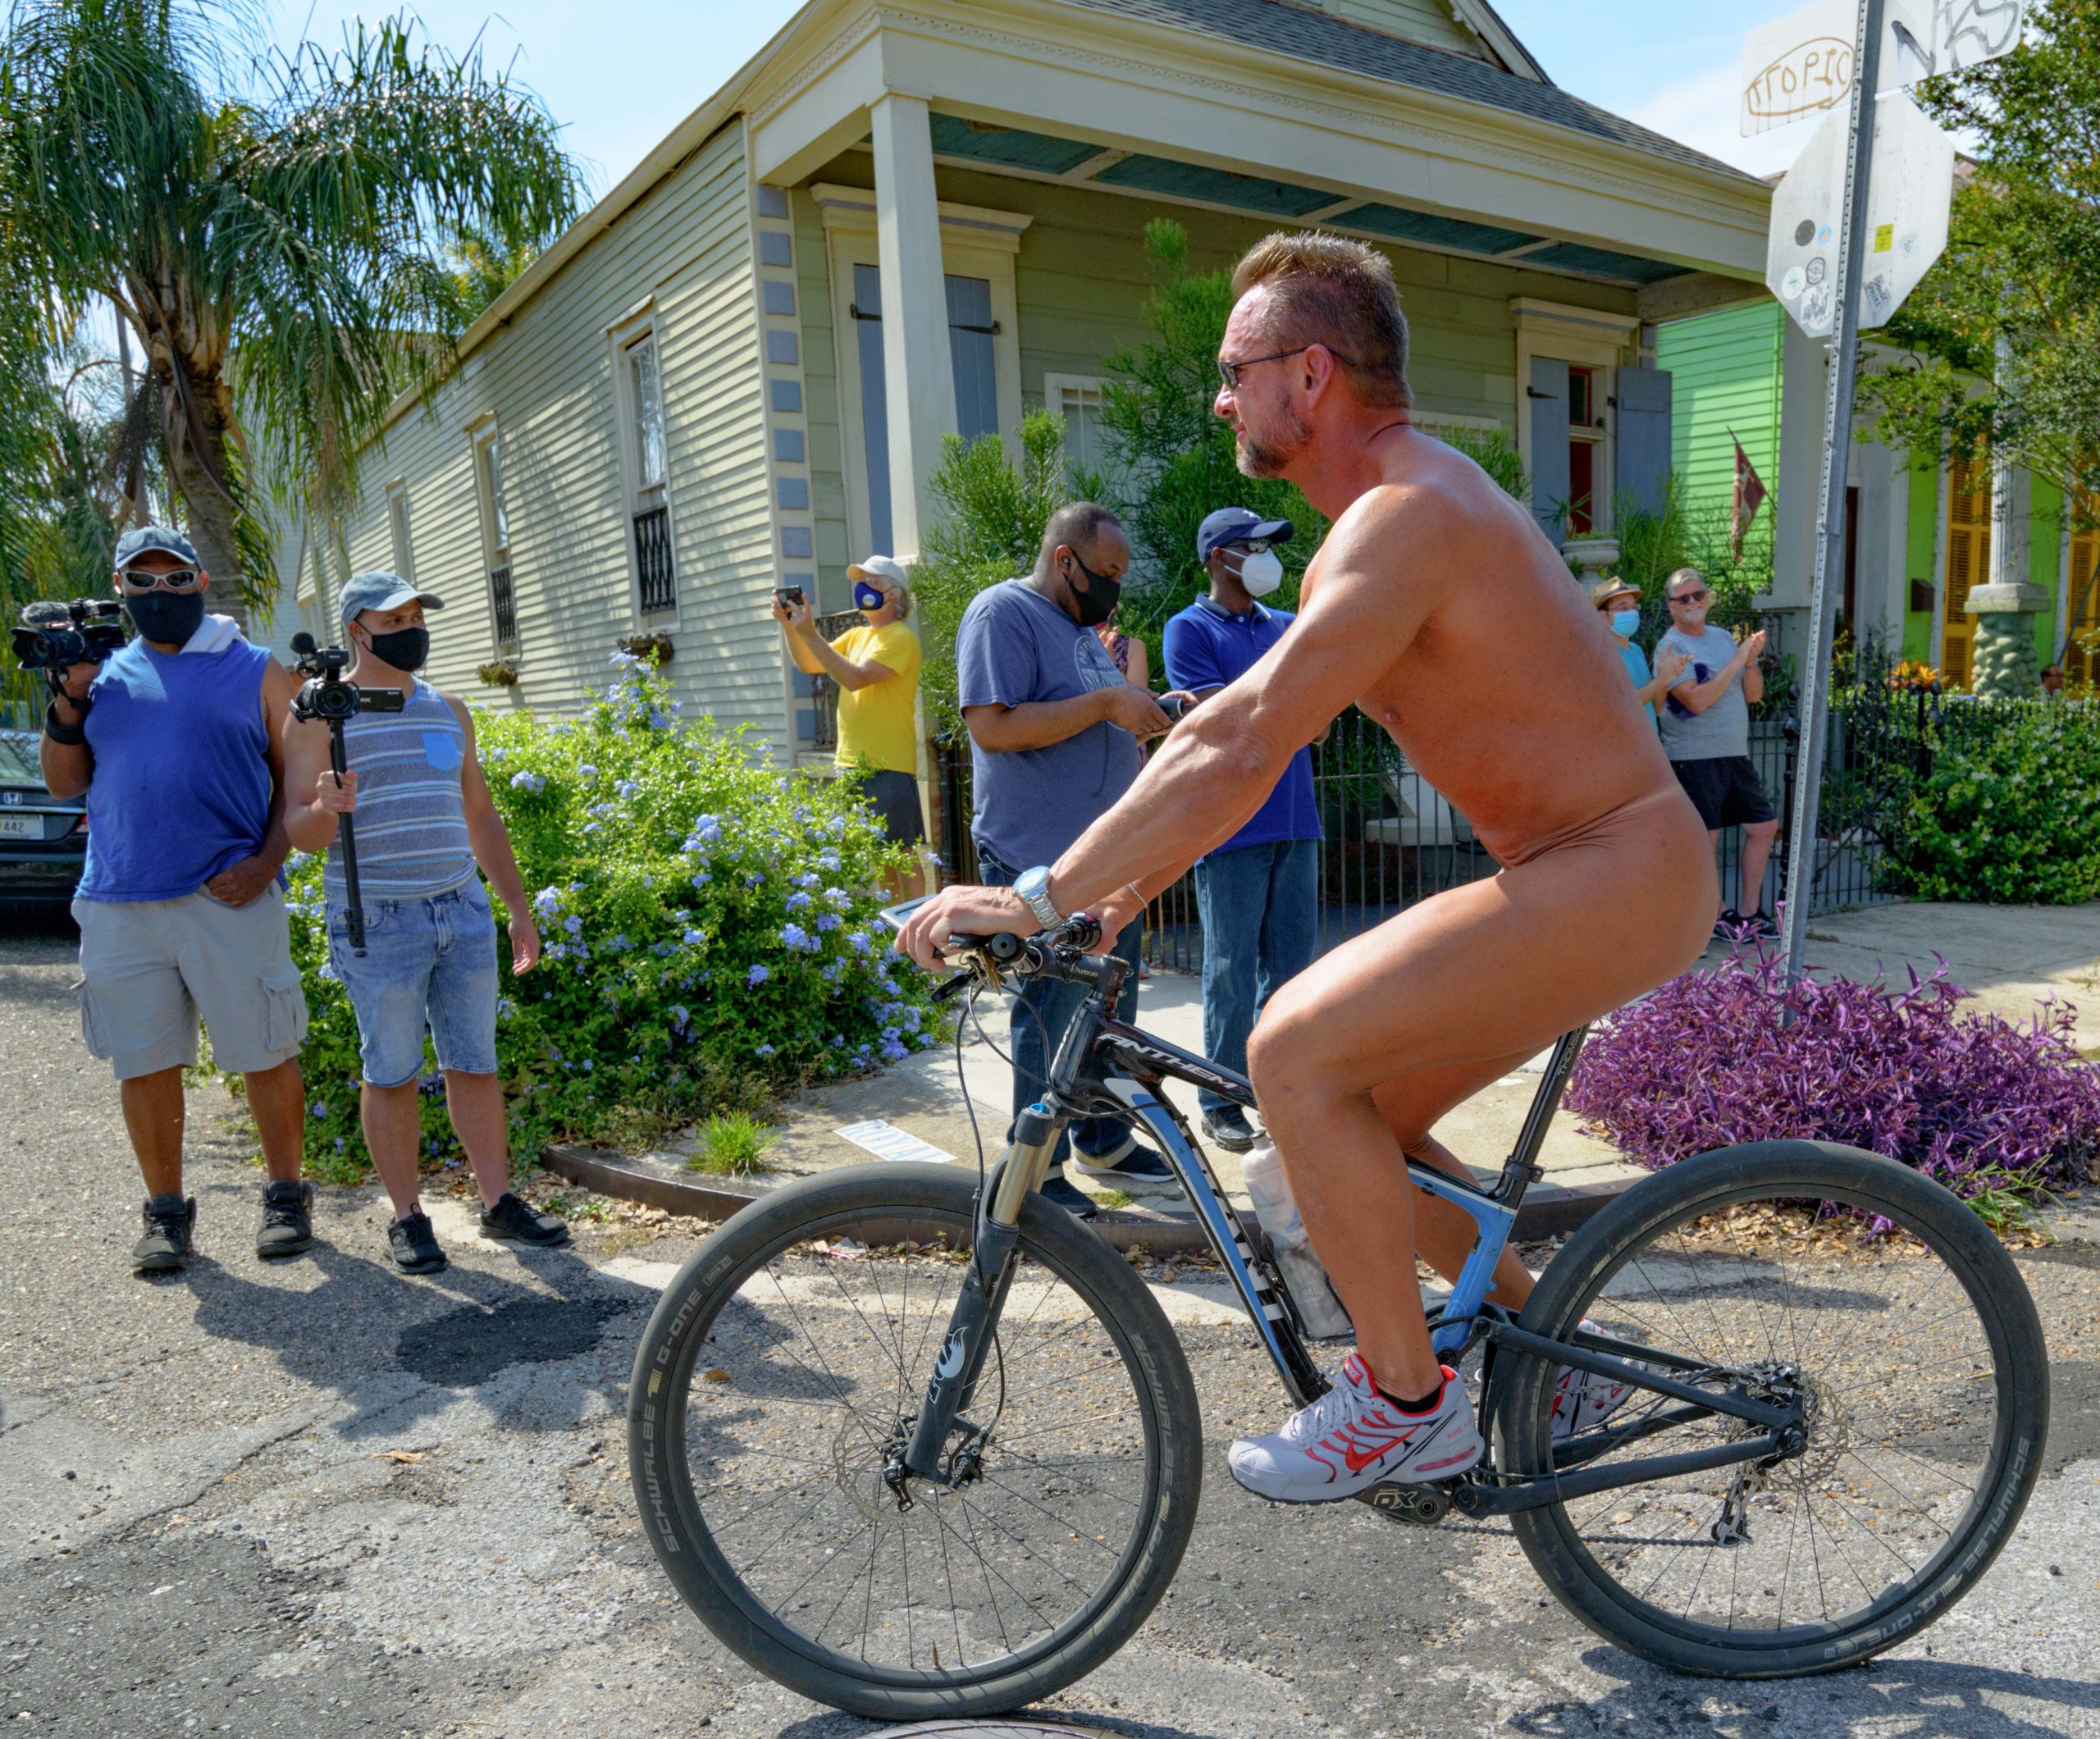 Riders in various stages of undress participate in the 12th annual World Naked Bike Ride New Orleans at Markey Park in the Bywater before continuing on to the French Quarter Saturday, June 13, 2020. The group also passed by a separate group of riders in the French Quarter taking part in the Motorcade for Pride / Rally for LGBTQ Lives. Both rides included LGBTQ+ riders.  World Naked Bike Ride NOLA states on its website that the purpose of the ride is to promote a cleaner, safer, body-positive world to the masses in a free, non-sexual, fun bike ride. “Our mission is to take to the streets riding nude as the best way of defending our dignity as humans on bikes. We expose just how vulnerable we are as cyclists on our own city streets. We also ride to protest the world's oil dependency, mainly cars, that negatively impacts the environment on this planet.” Photo by Matthew Hinton